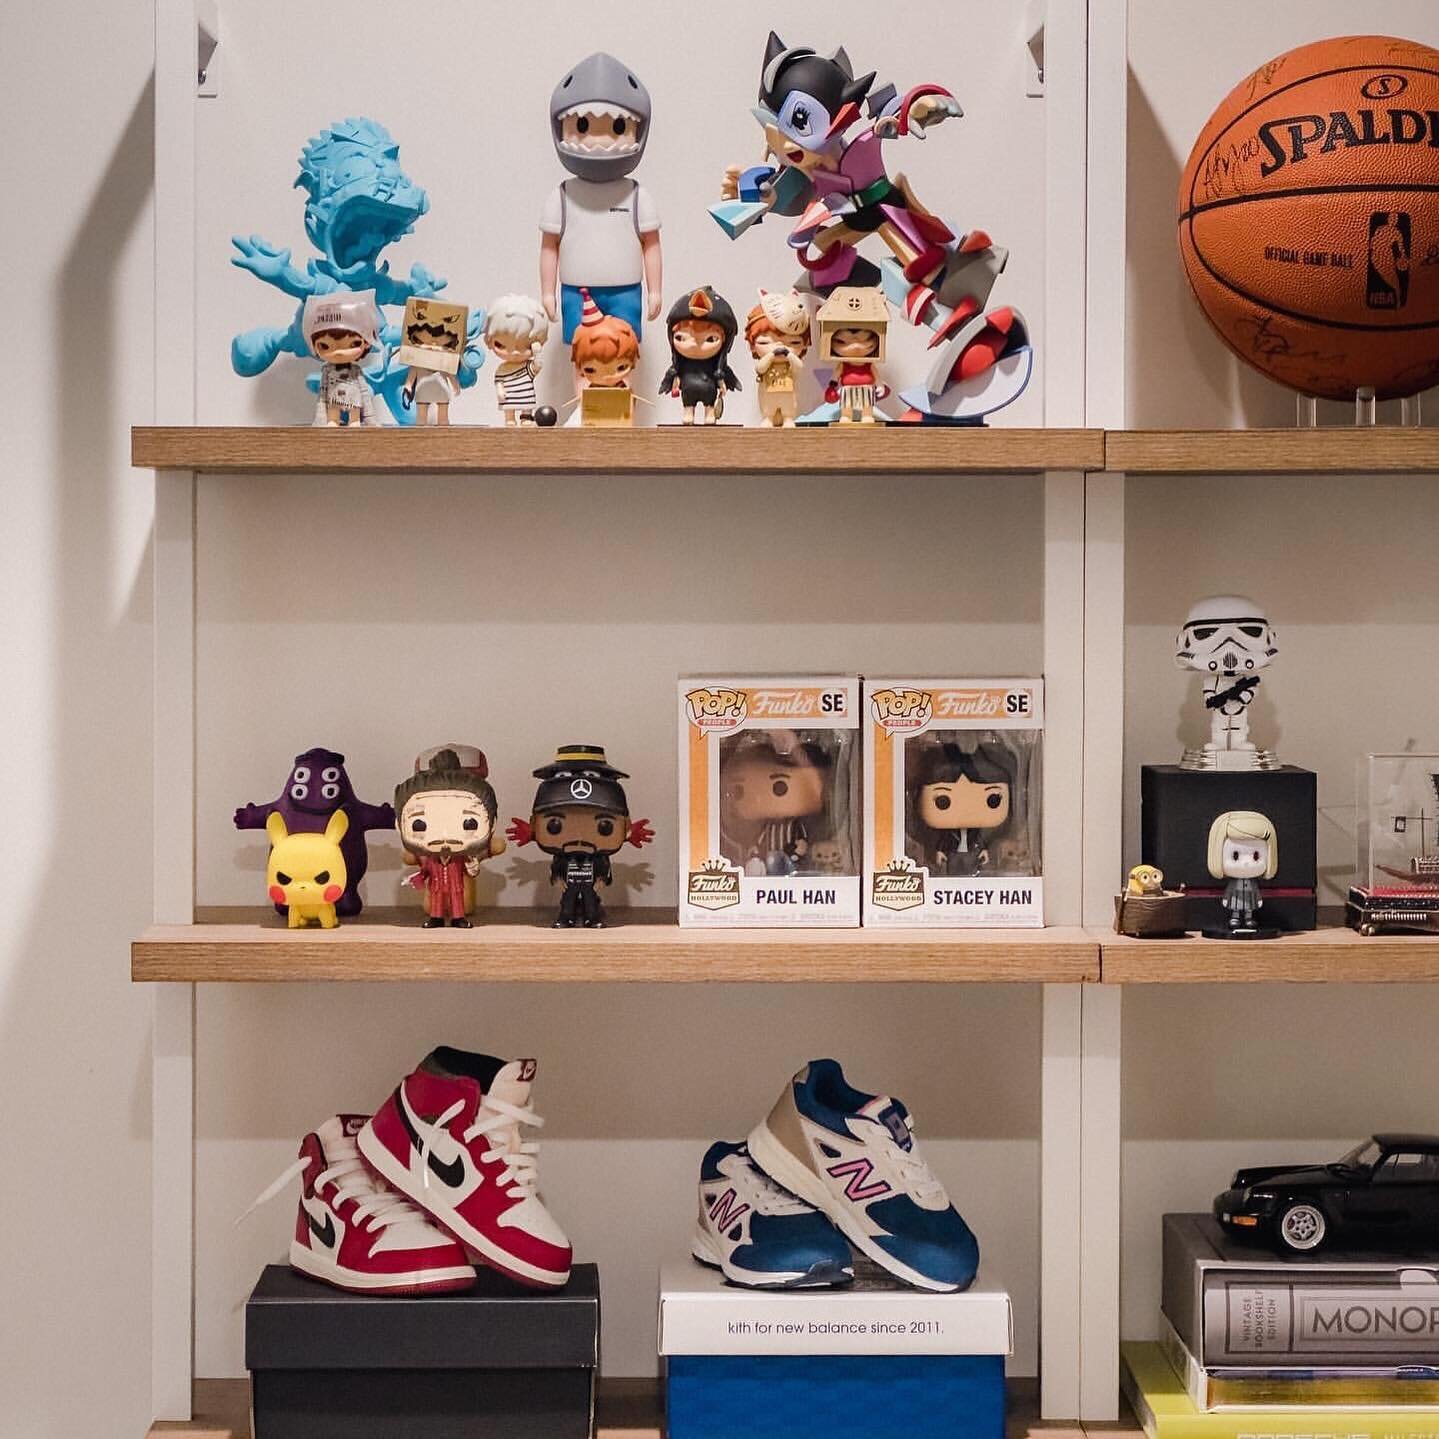 #tramptshelfie What else do you guys collect besides toys? My wallet is very glad I don&rsquo;t collect sneakers, toys are already melting my credit cards. 💳🔥😅 &bull; 📷 by @roomfoursquares 

&mdash;&mdash;&mdash;&mdash;&mdash;&mdash;&mdash;&mdash